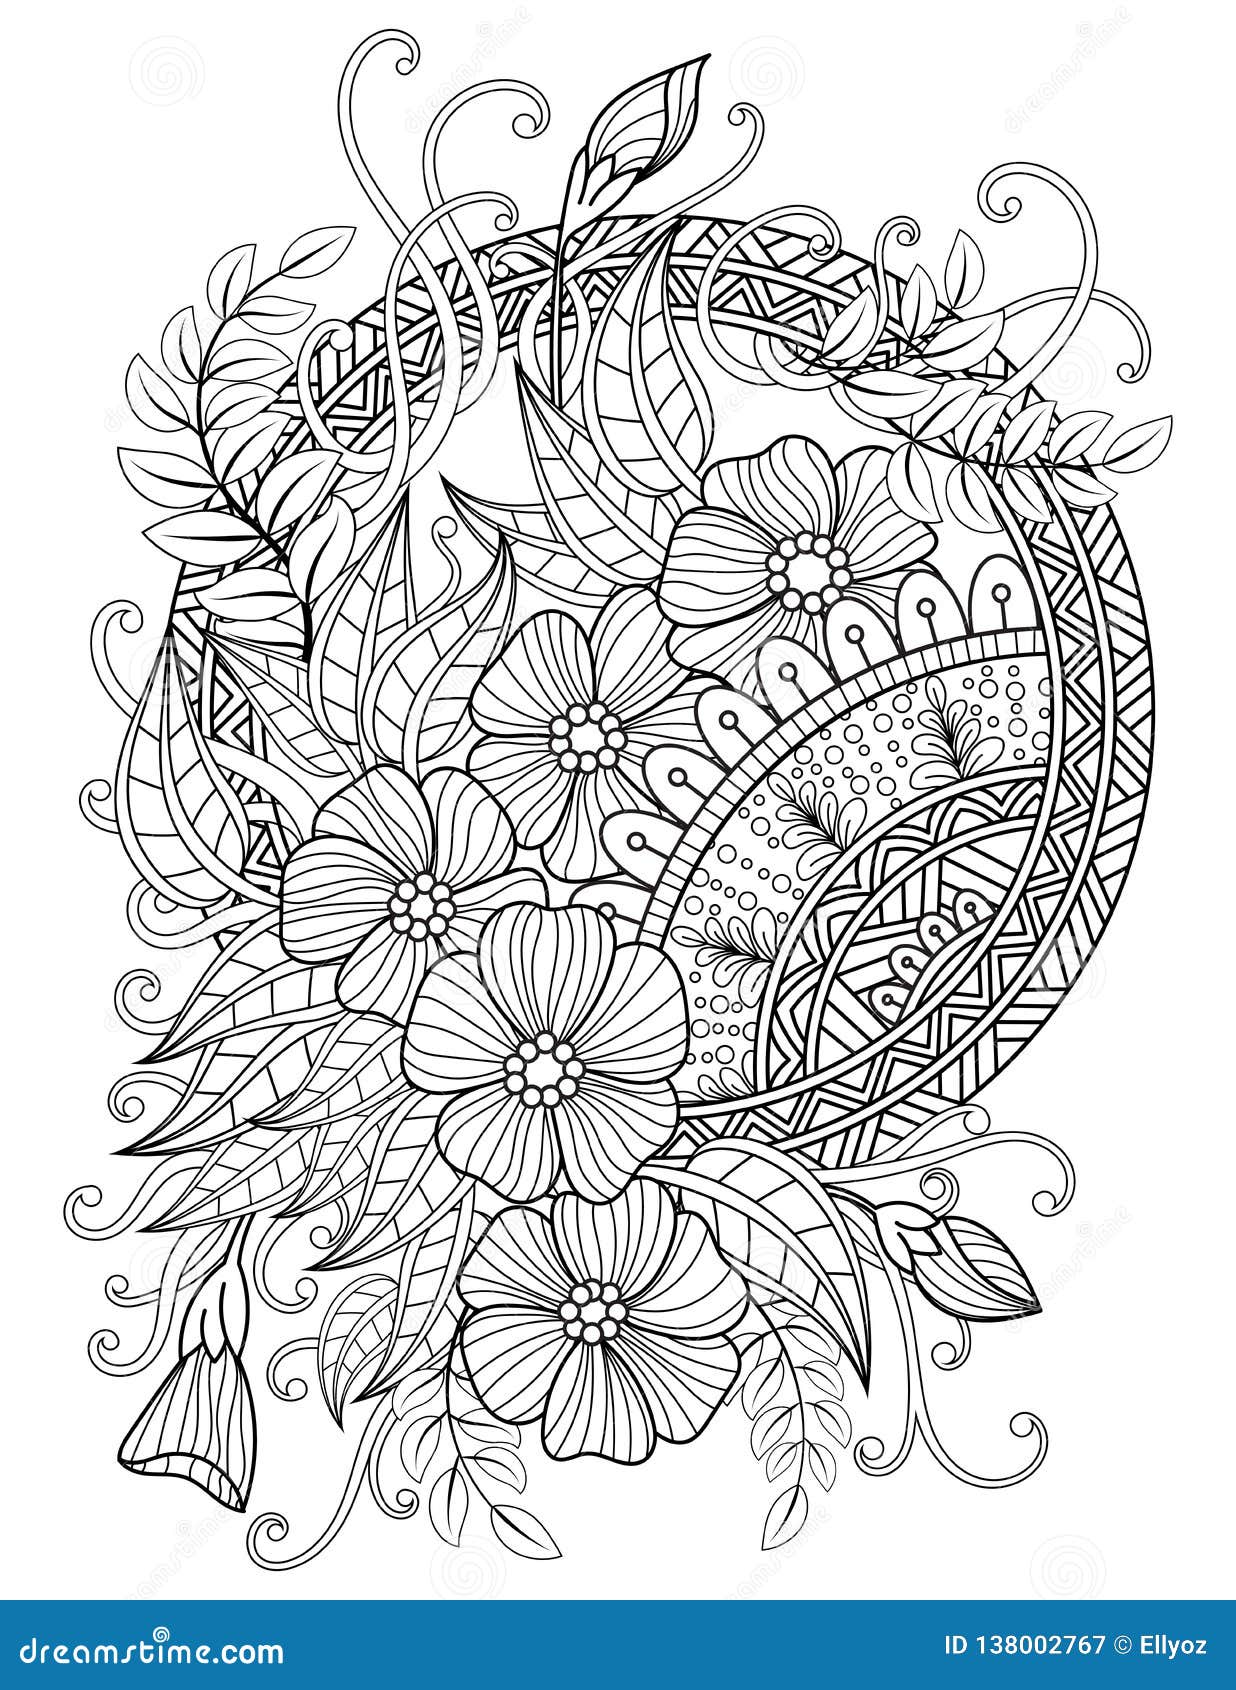 Mandala Adult Coloring Pages Stock Vector   Illustration of boho ...